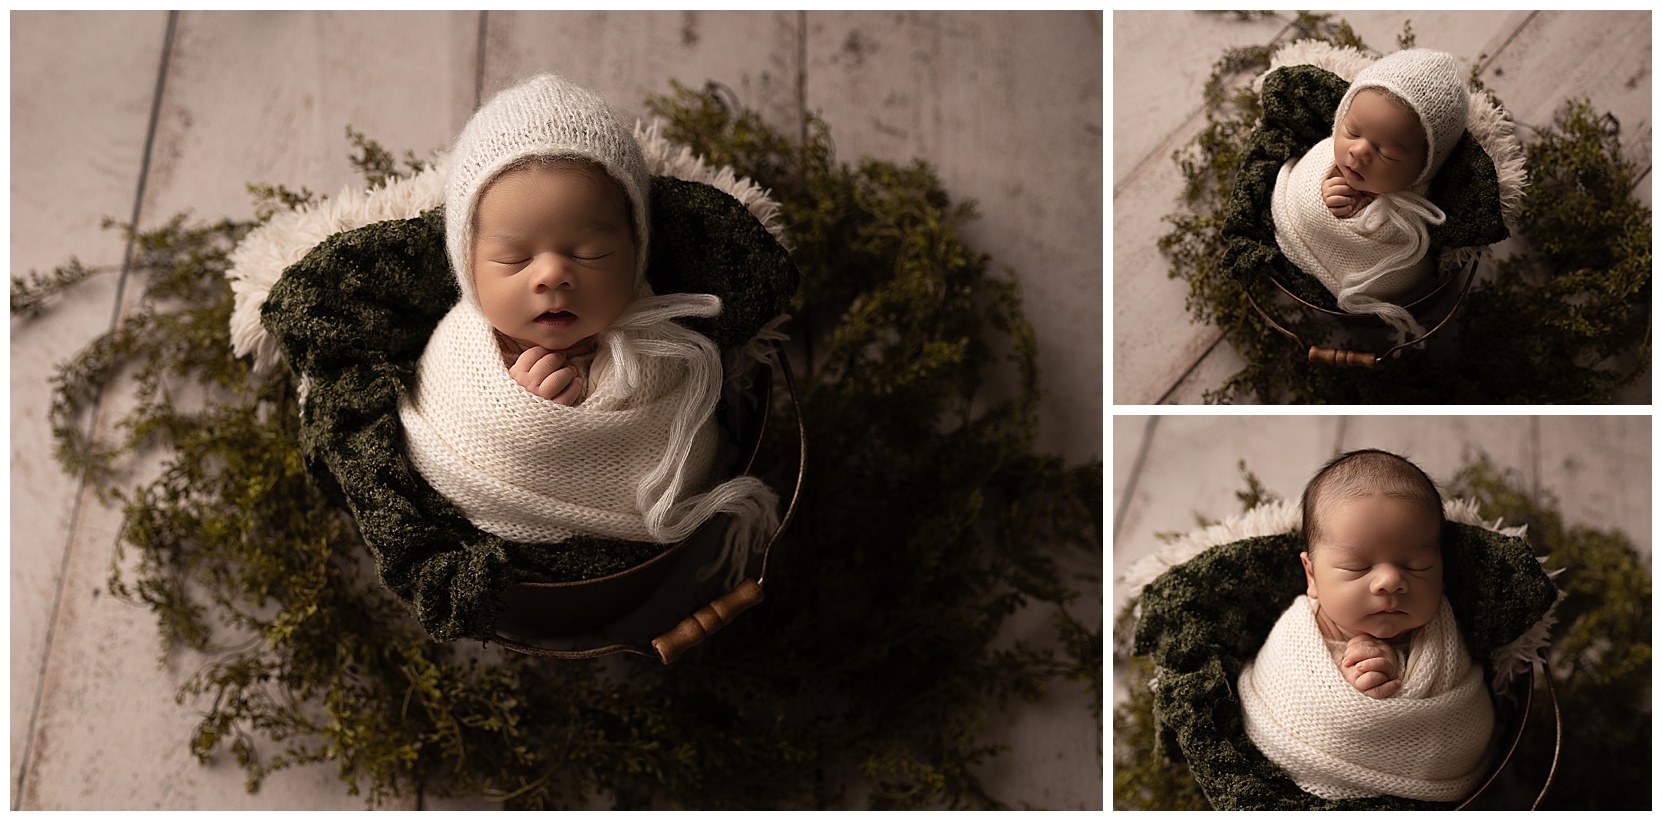 newborn baby wrapped in white knit hat greenery